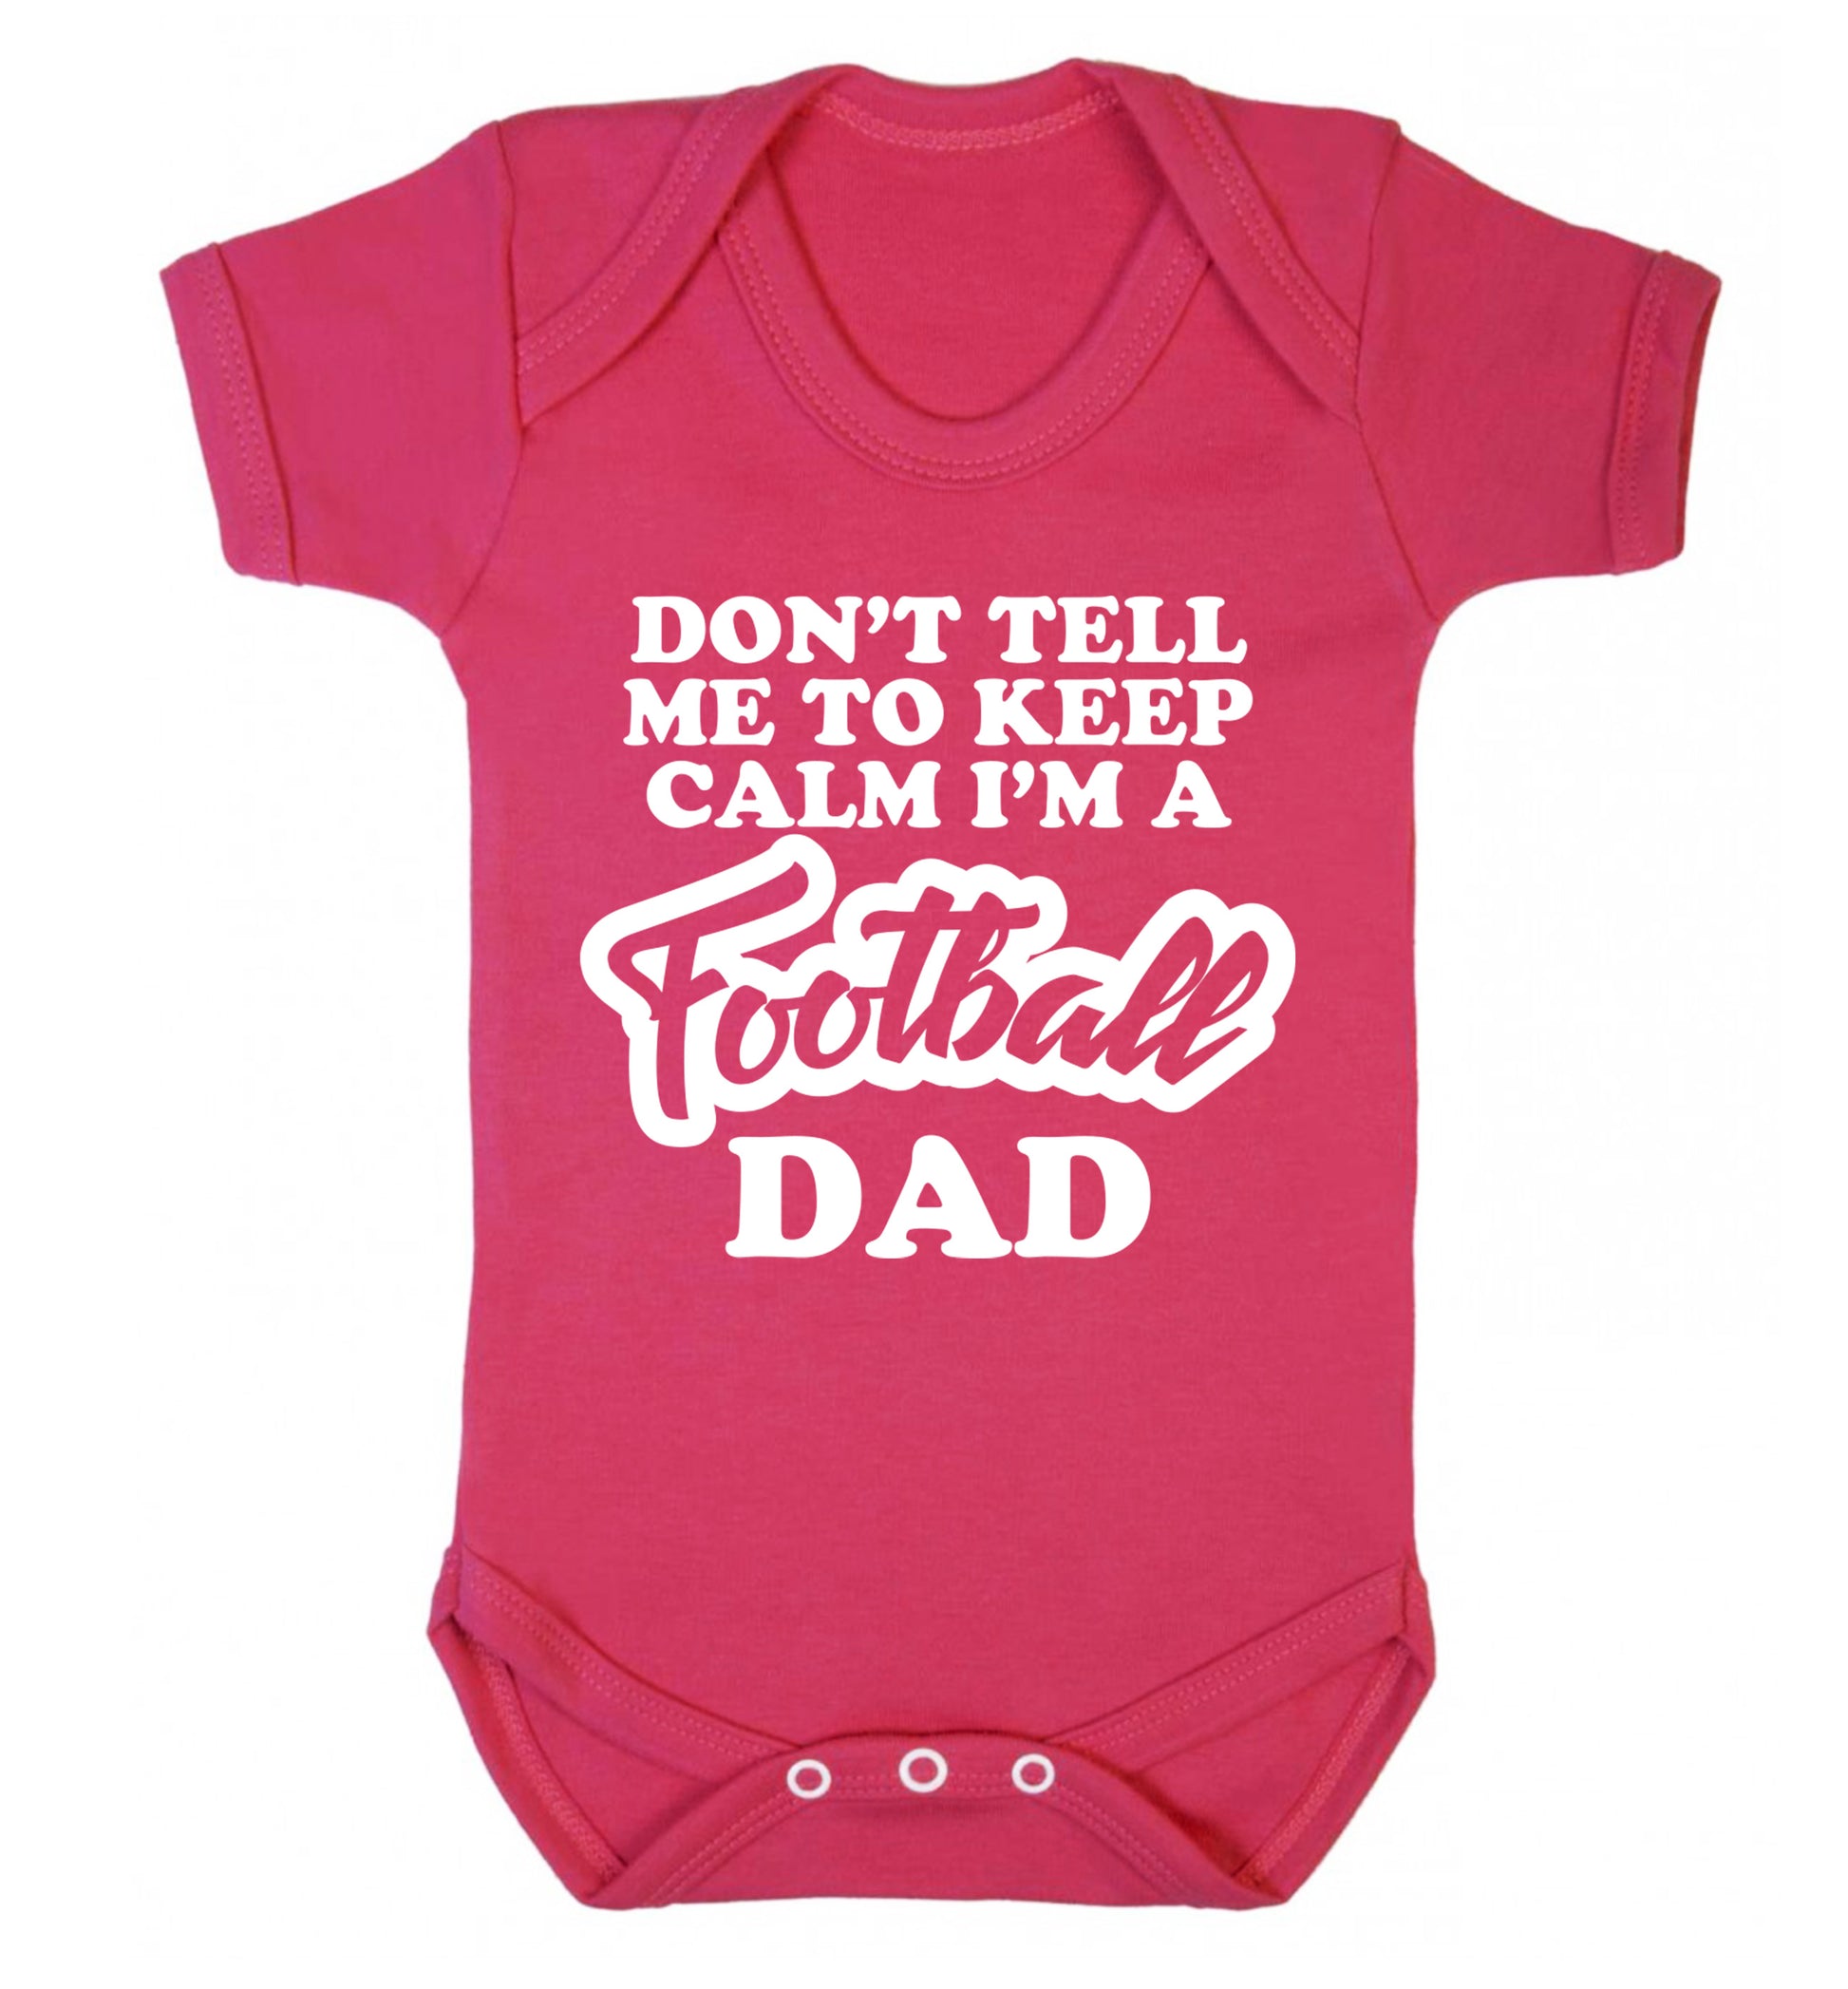 Don't tell me to keep calm I'm a football grandad Baby Vest dark pink 18-24 months